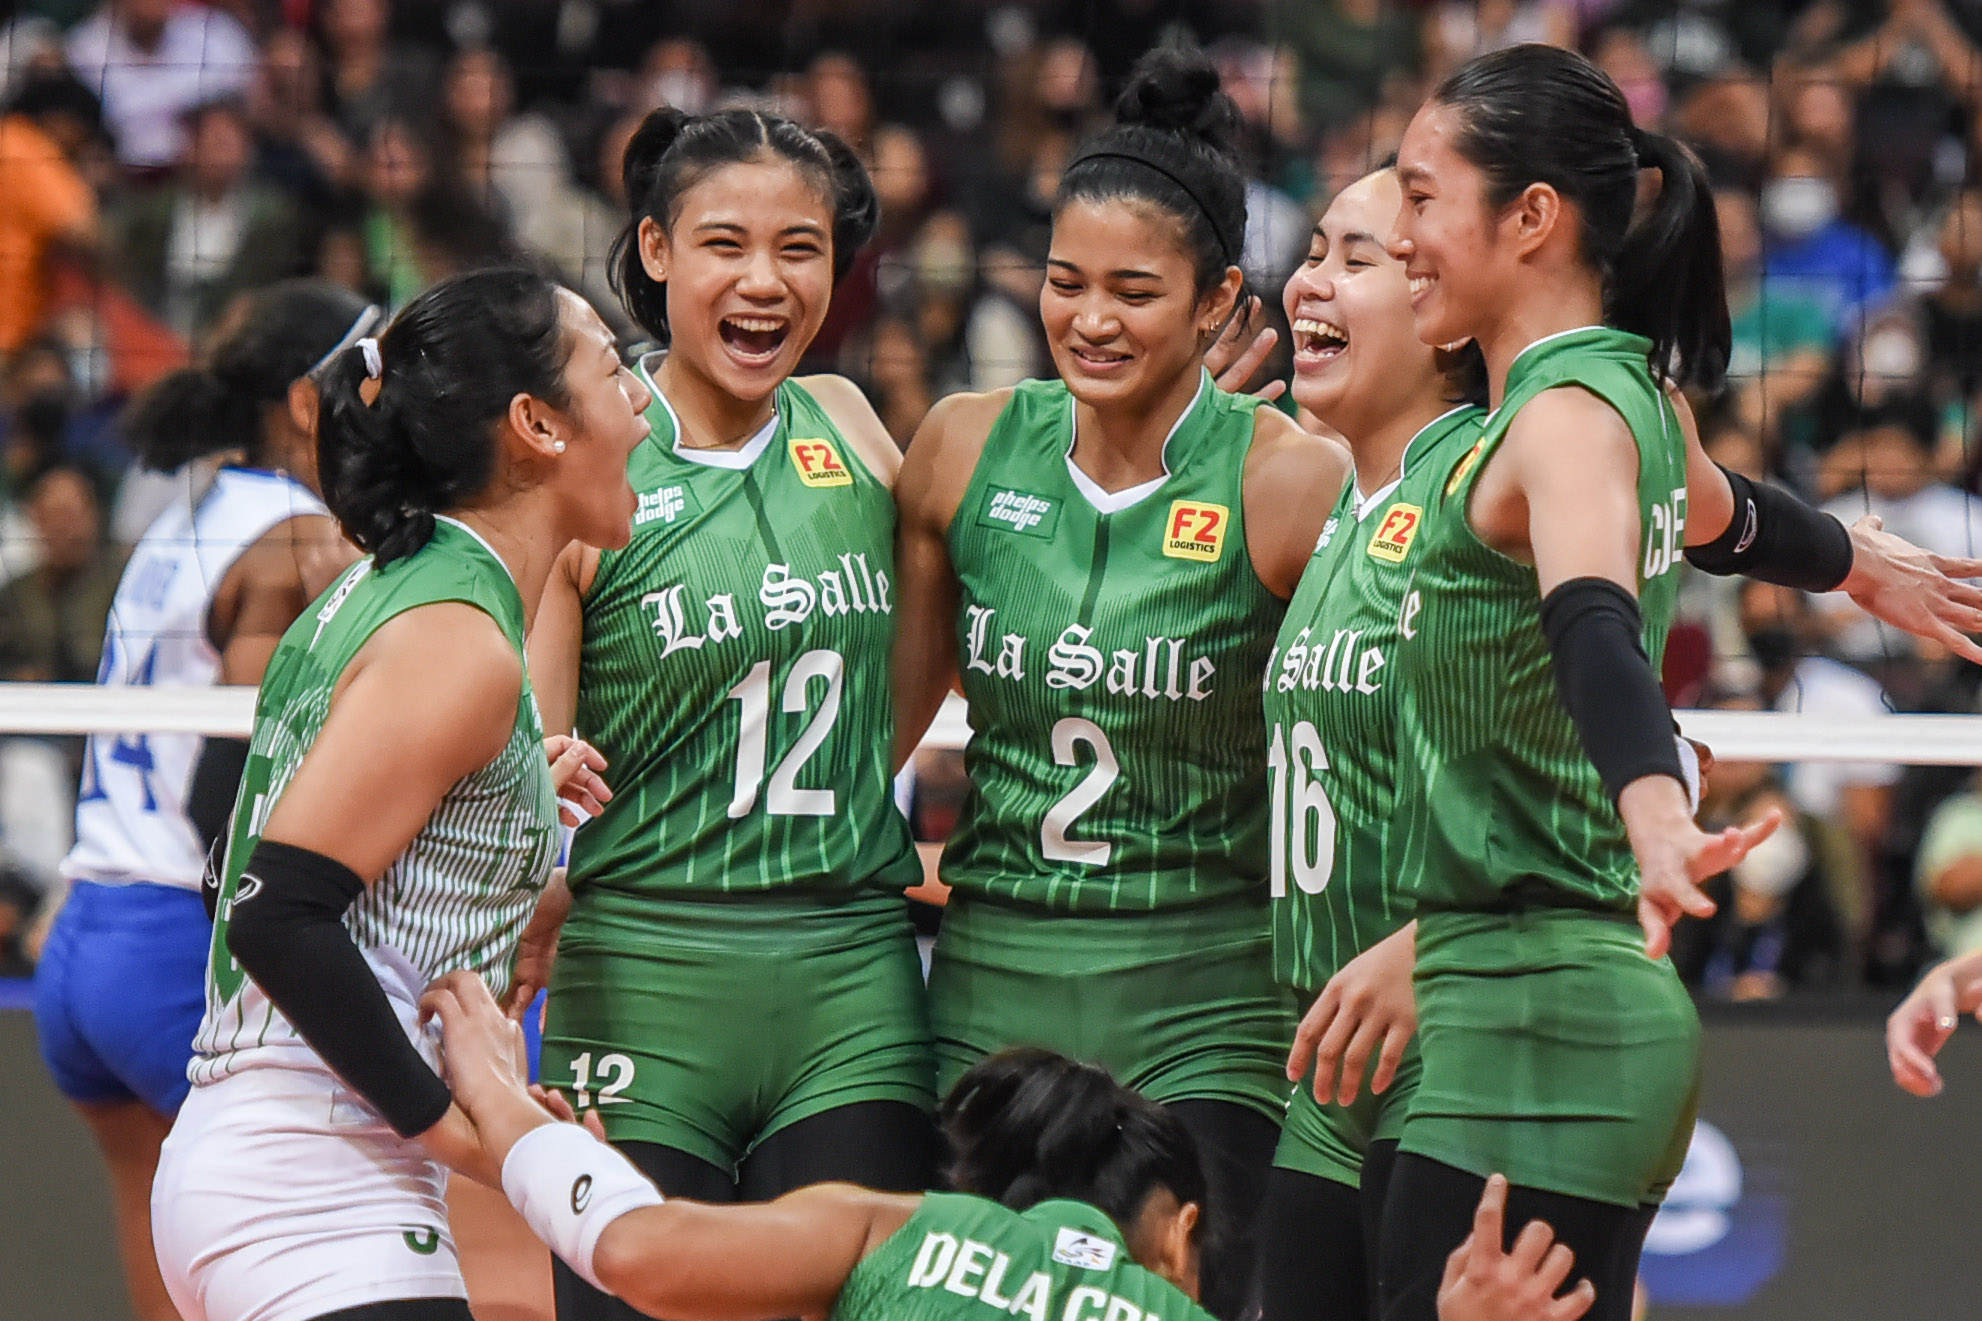 La Salle Lady Spikers destroys Ateneo for 11th straight win since 2017